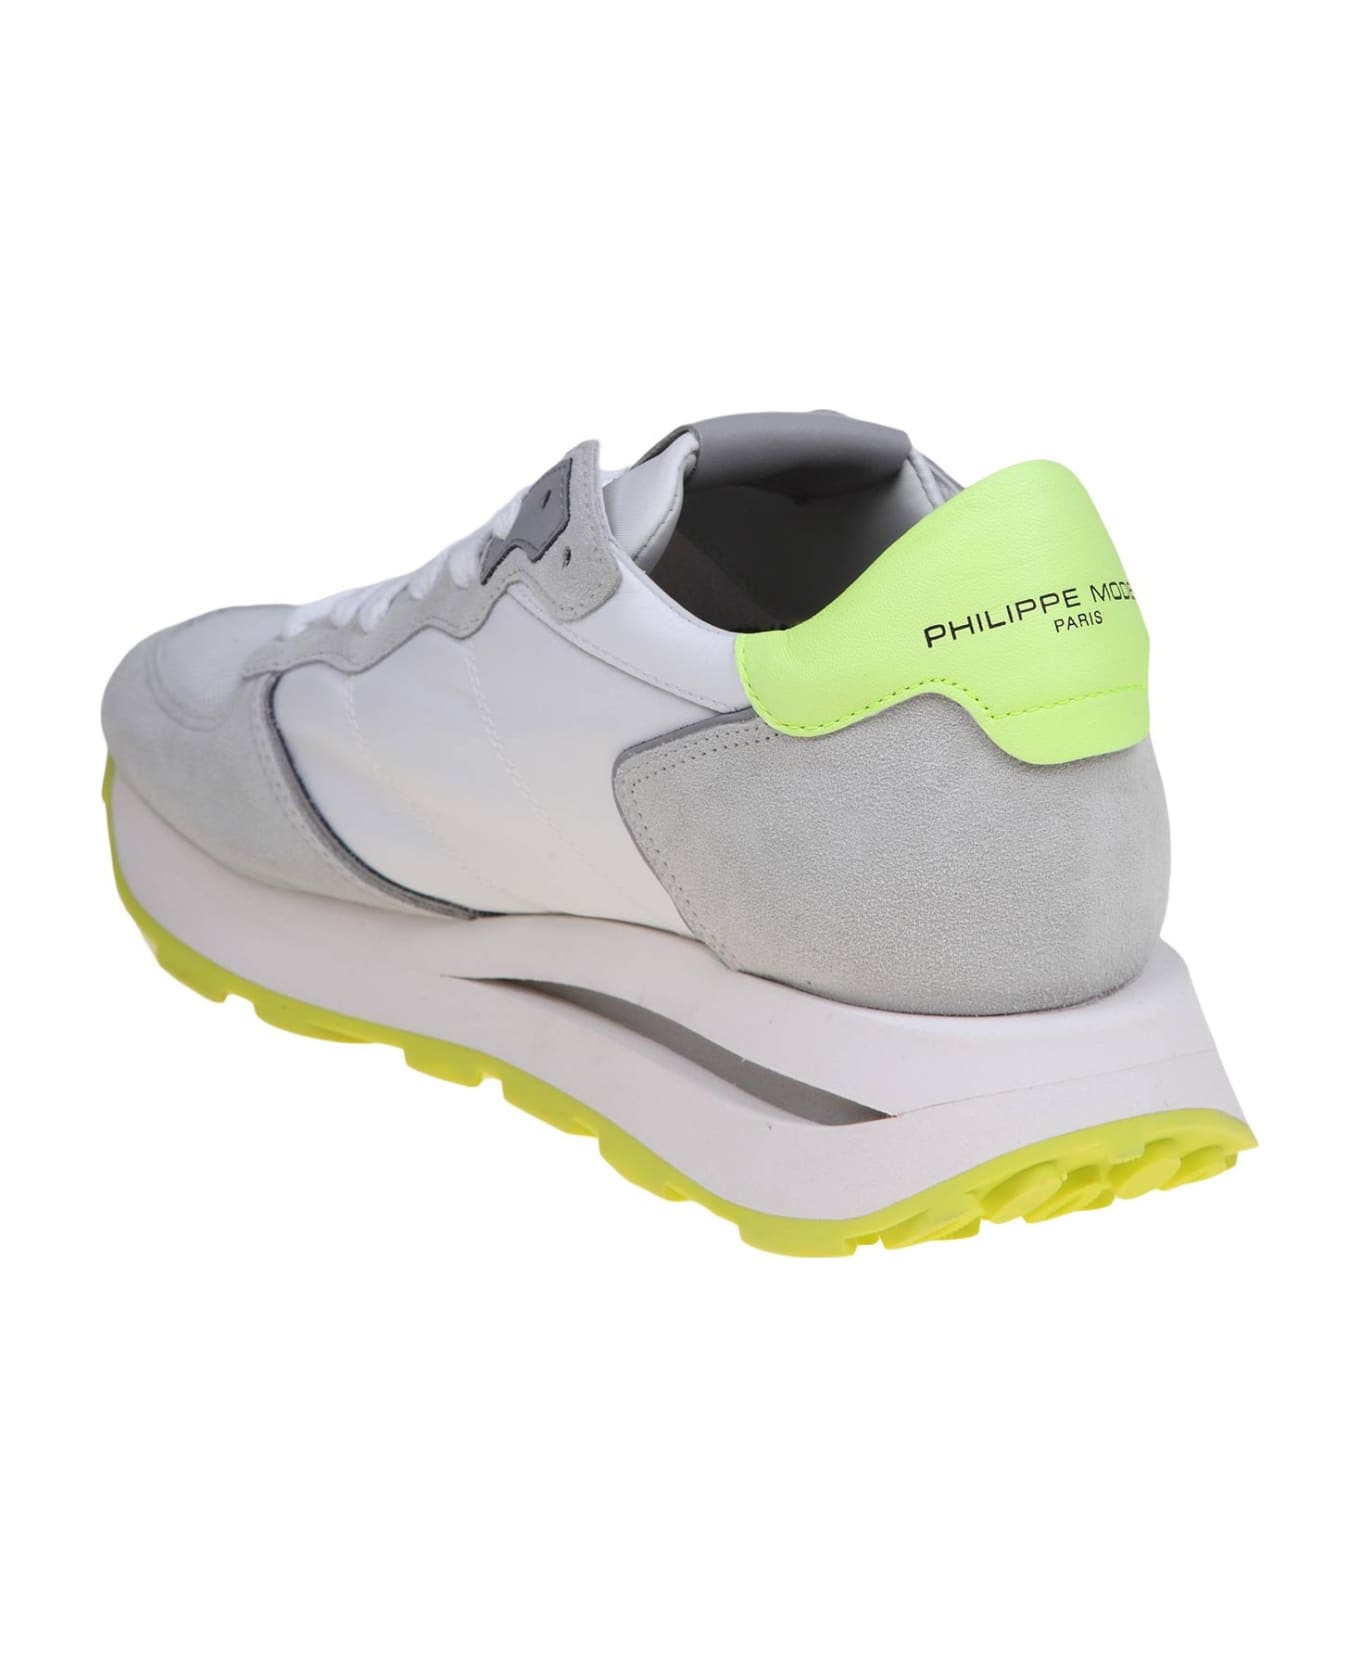 Philippe Model Tropez Haute Low Sneakers In Suede And Nylon Color White And Yellow - Blanc/Jaune スニーカー